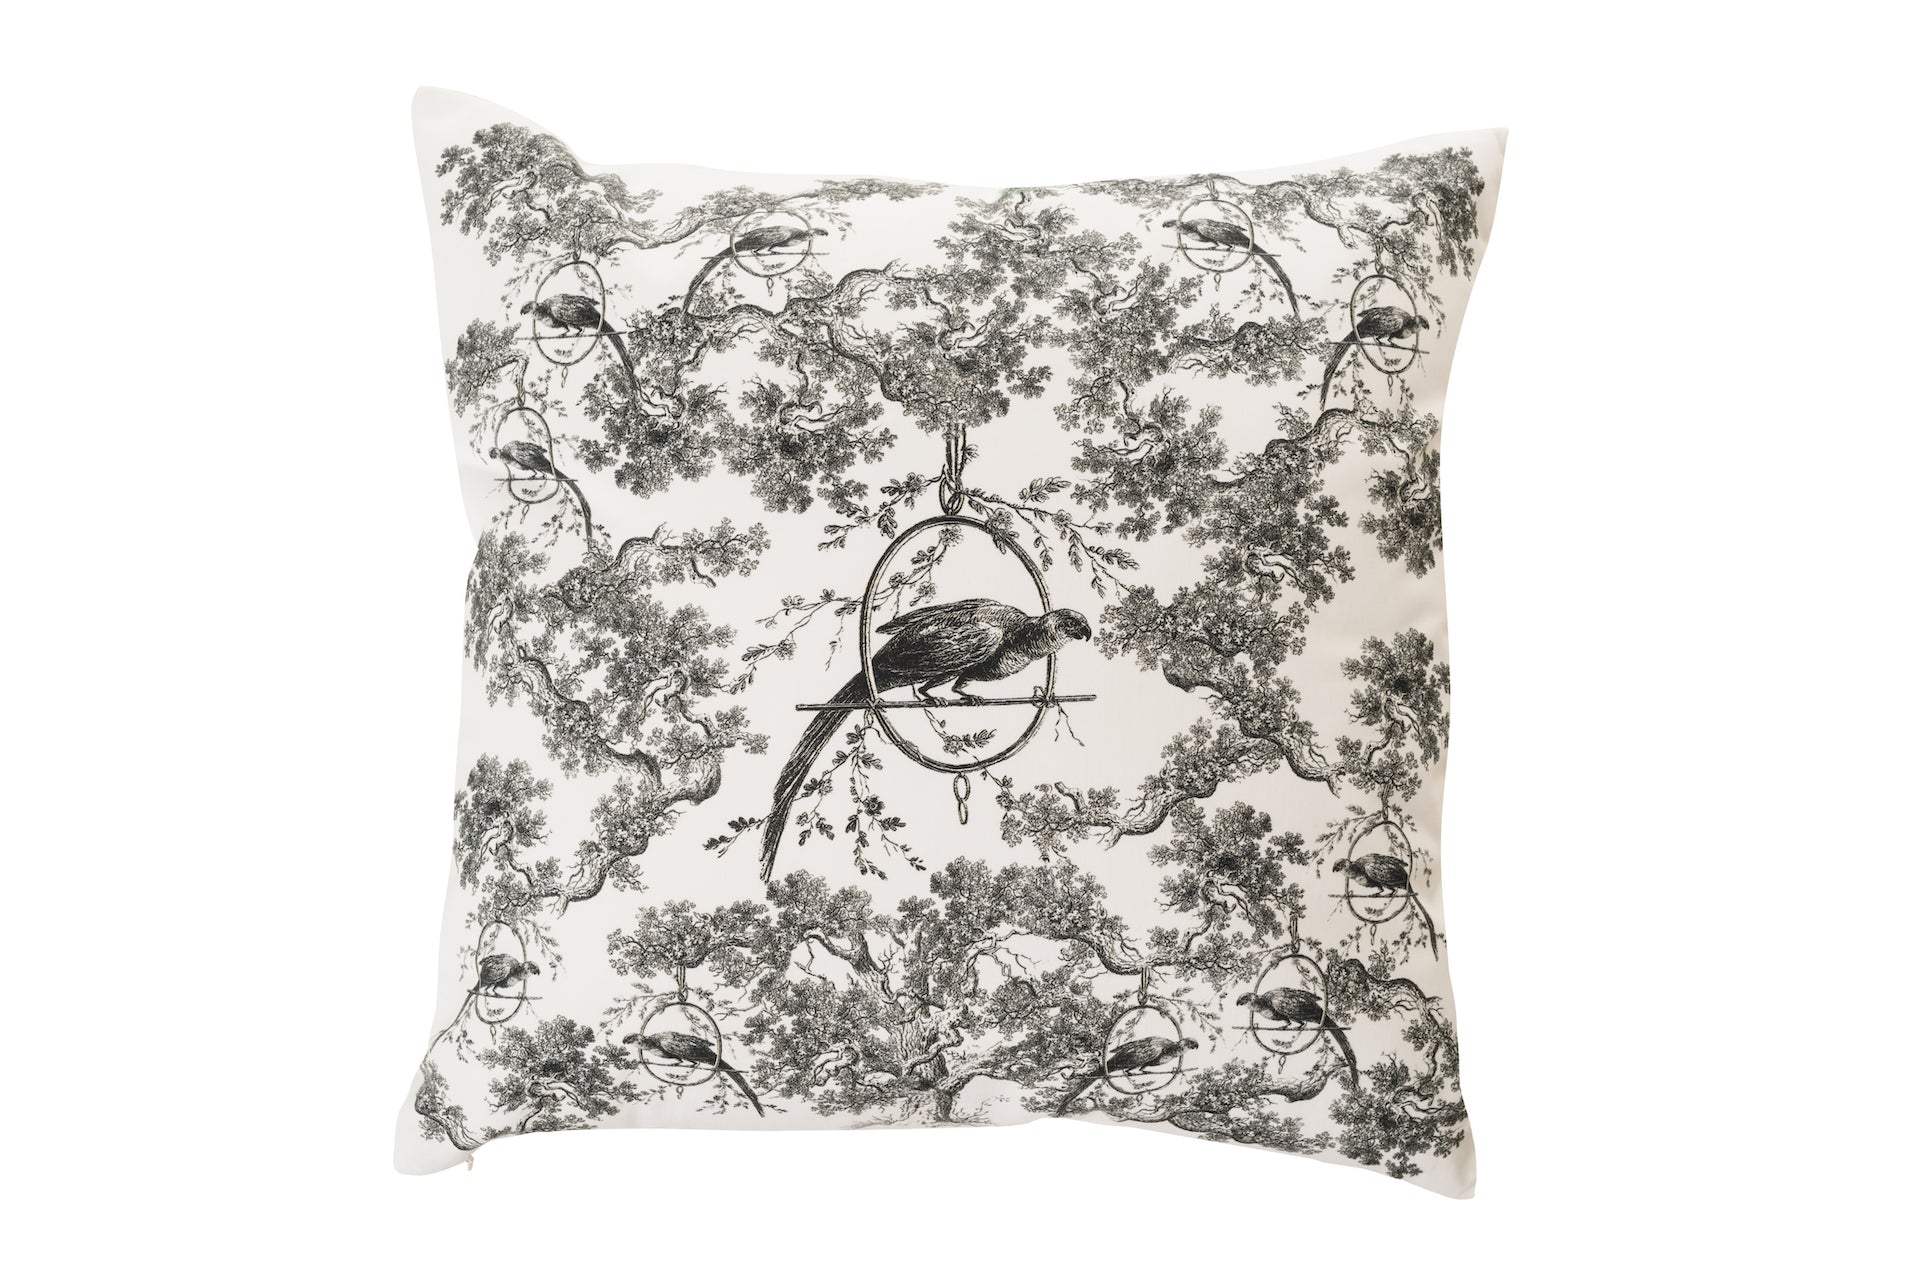 Toile de Jouy cushion cover in black and white - House of Castlebird Rose